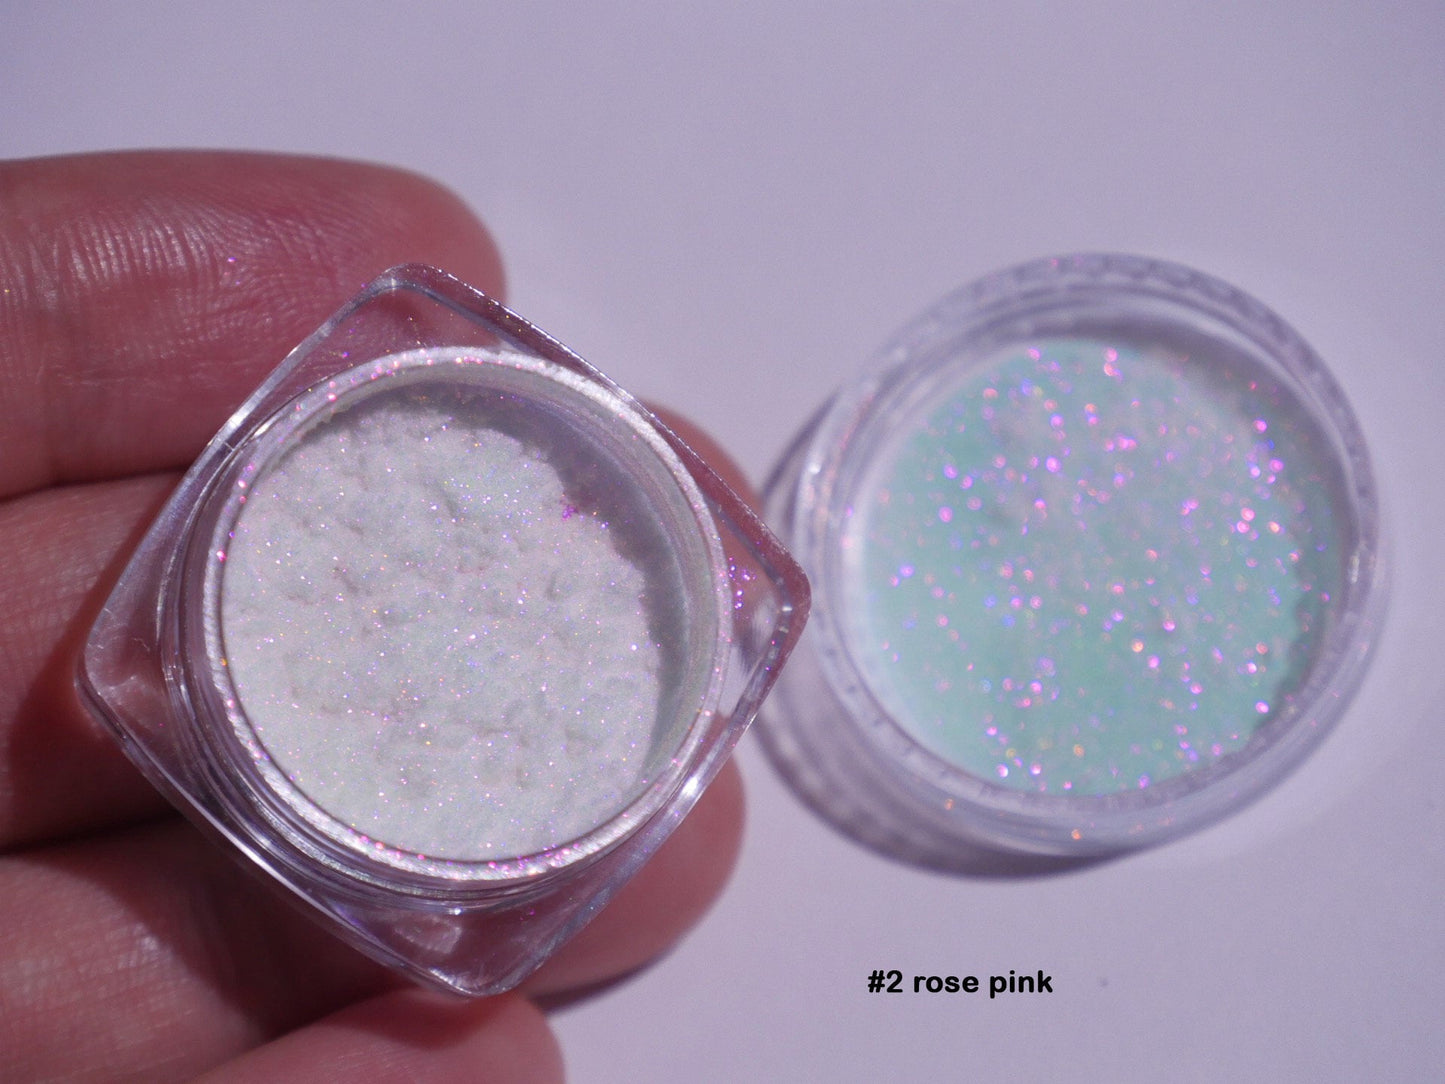 Icy Chameleon Powder Illusion Mermaid Glitter/ Highly concentrated Iridescence Laser shimmer Powder/ Mirror Reflective Manicure Supply